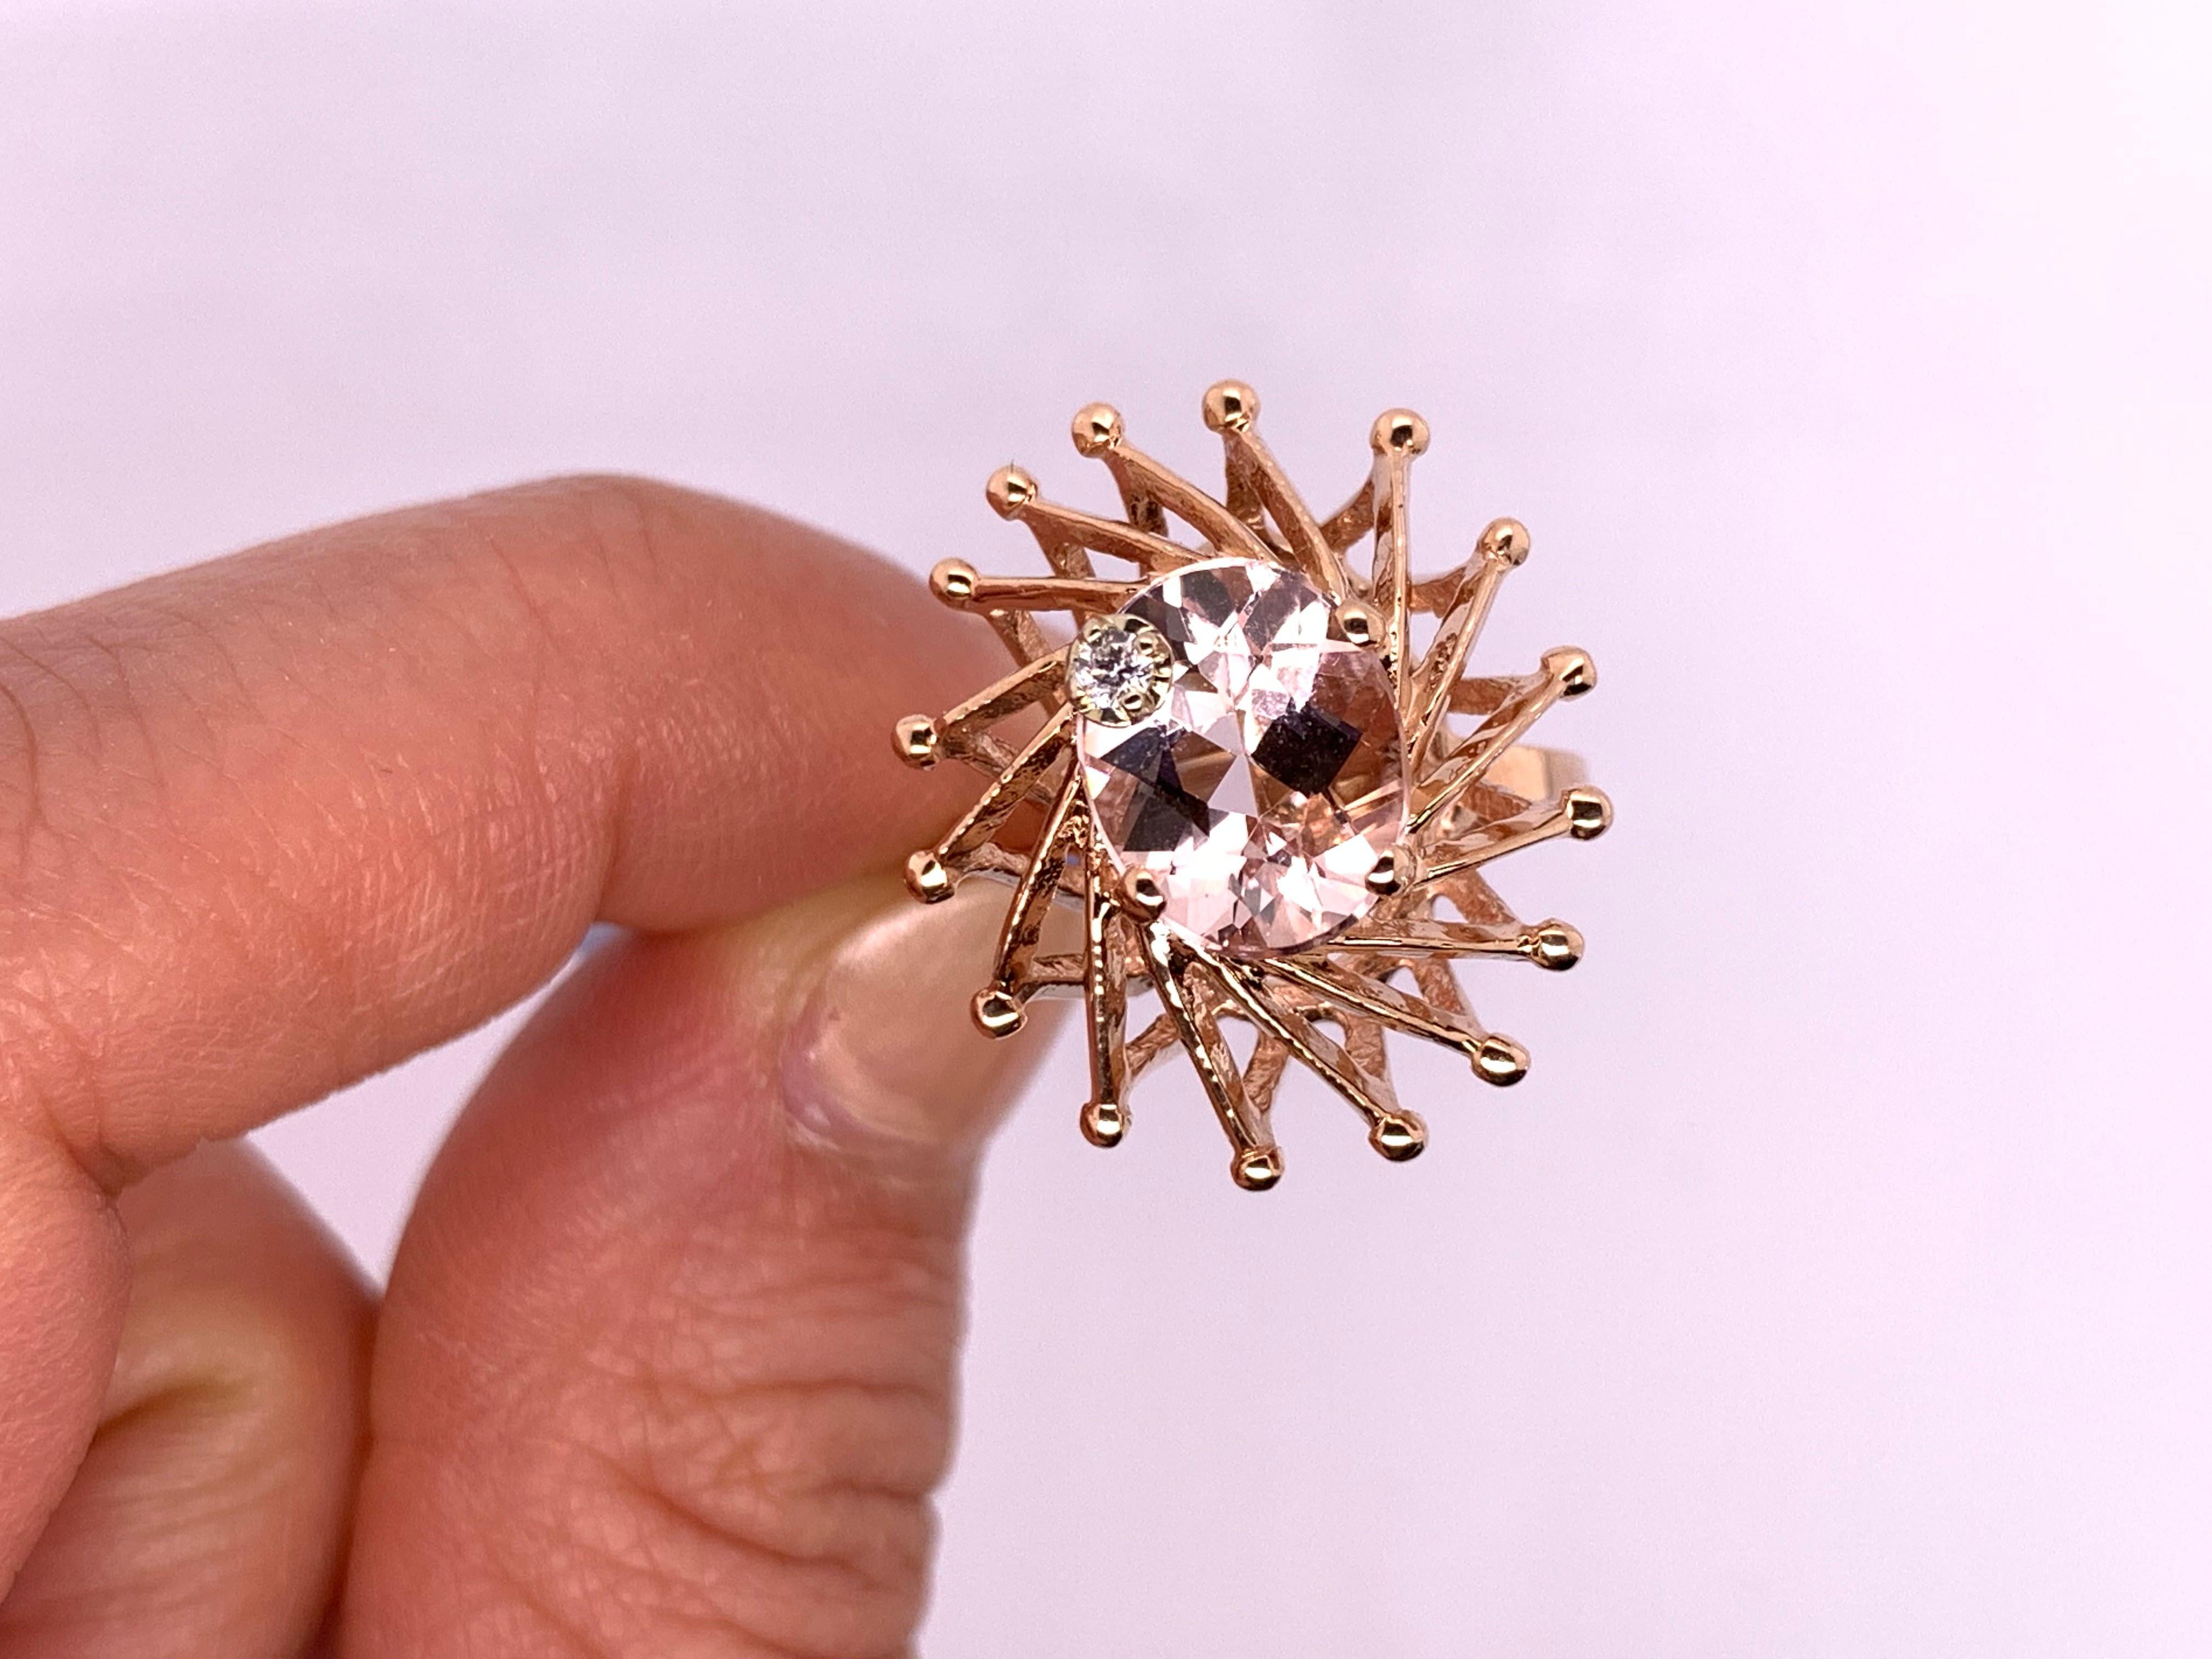 Material: 14k Rose Gold 
Center Stone Details: 1 Oval Pink Morganite at 2.43 Carats- Measuring 10 x 8 mm
Mounting Diamond Details: 1 Round White Diamond at 0.02 Carats - Clarity: SI / Color: H-I
Ring Size: Size 6 (can be sized)

Fine one-of-a kind